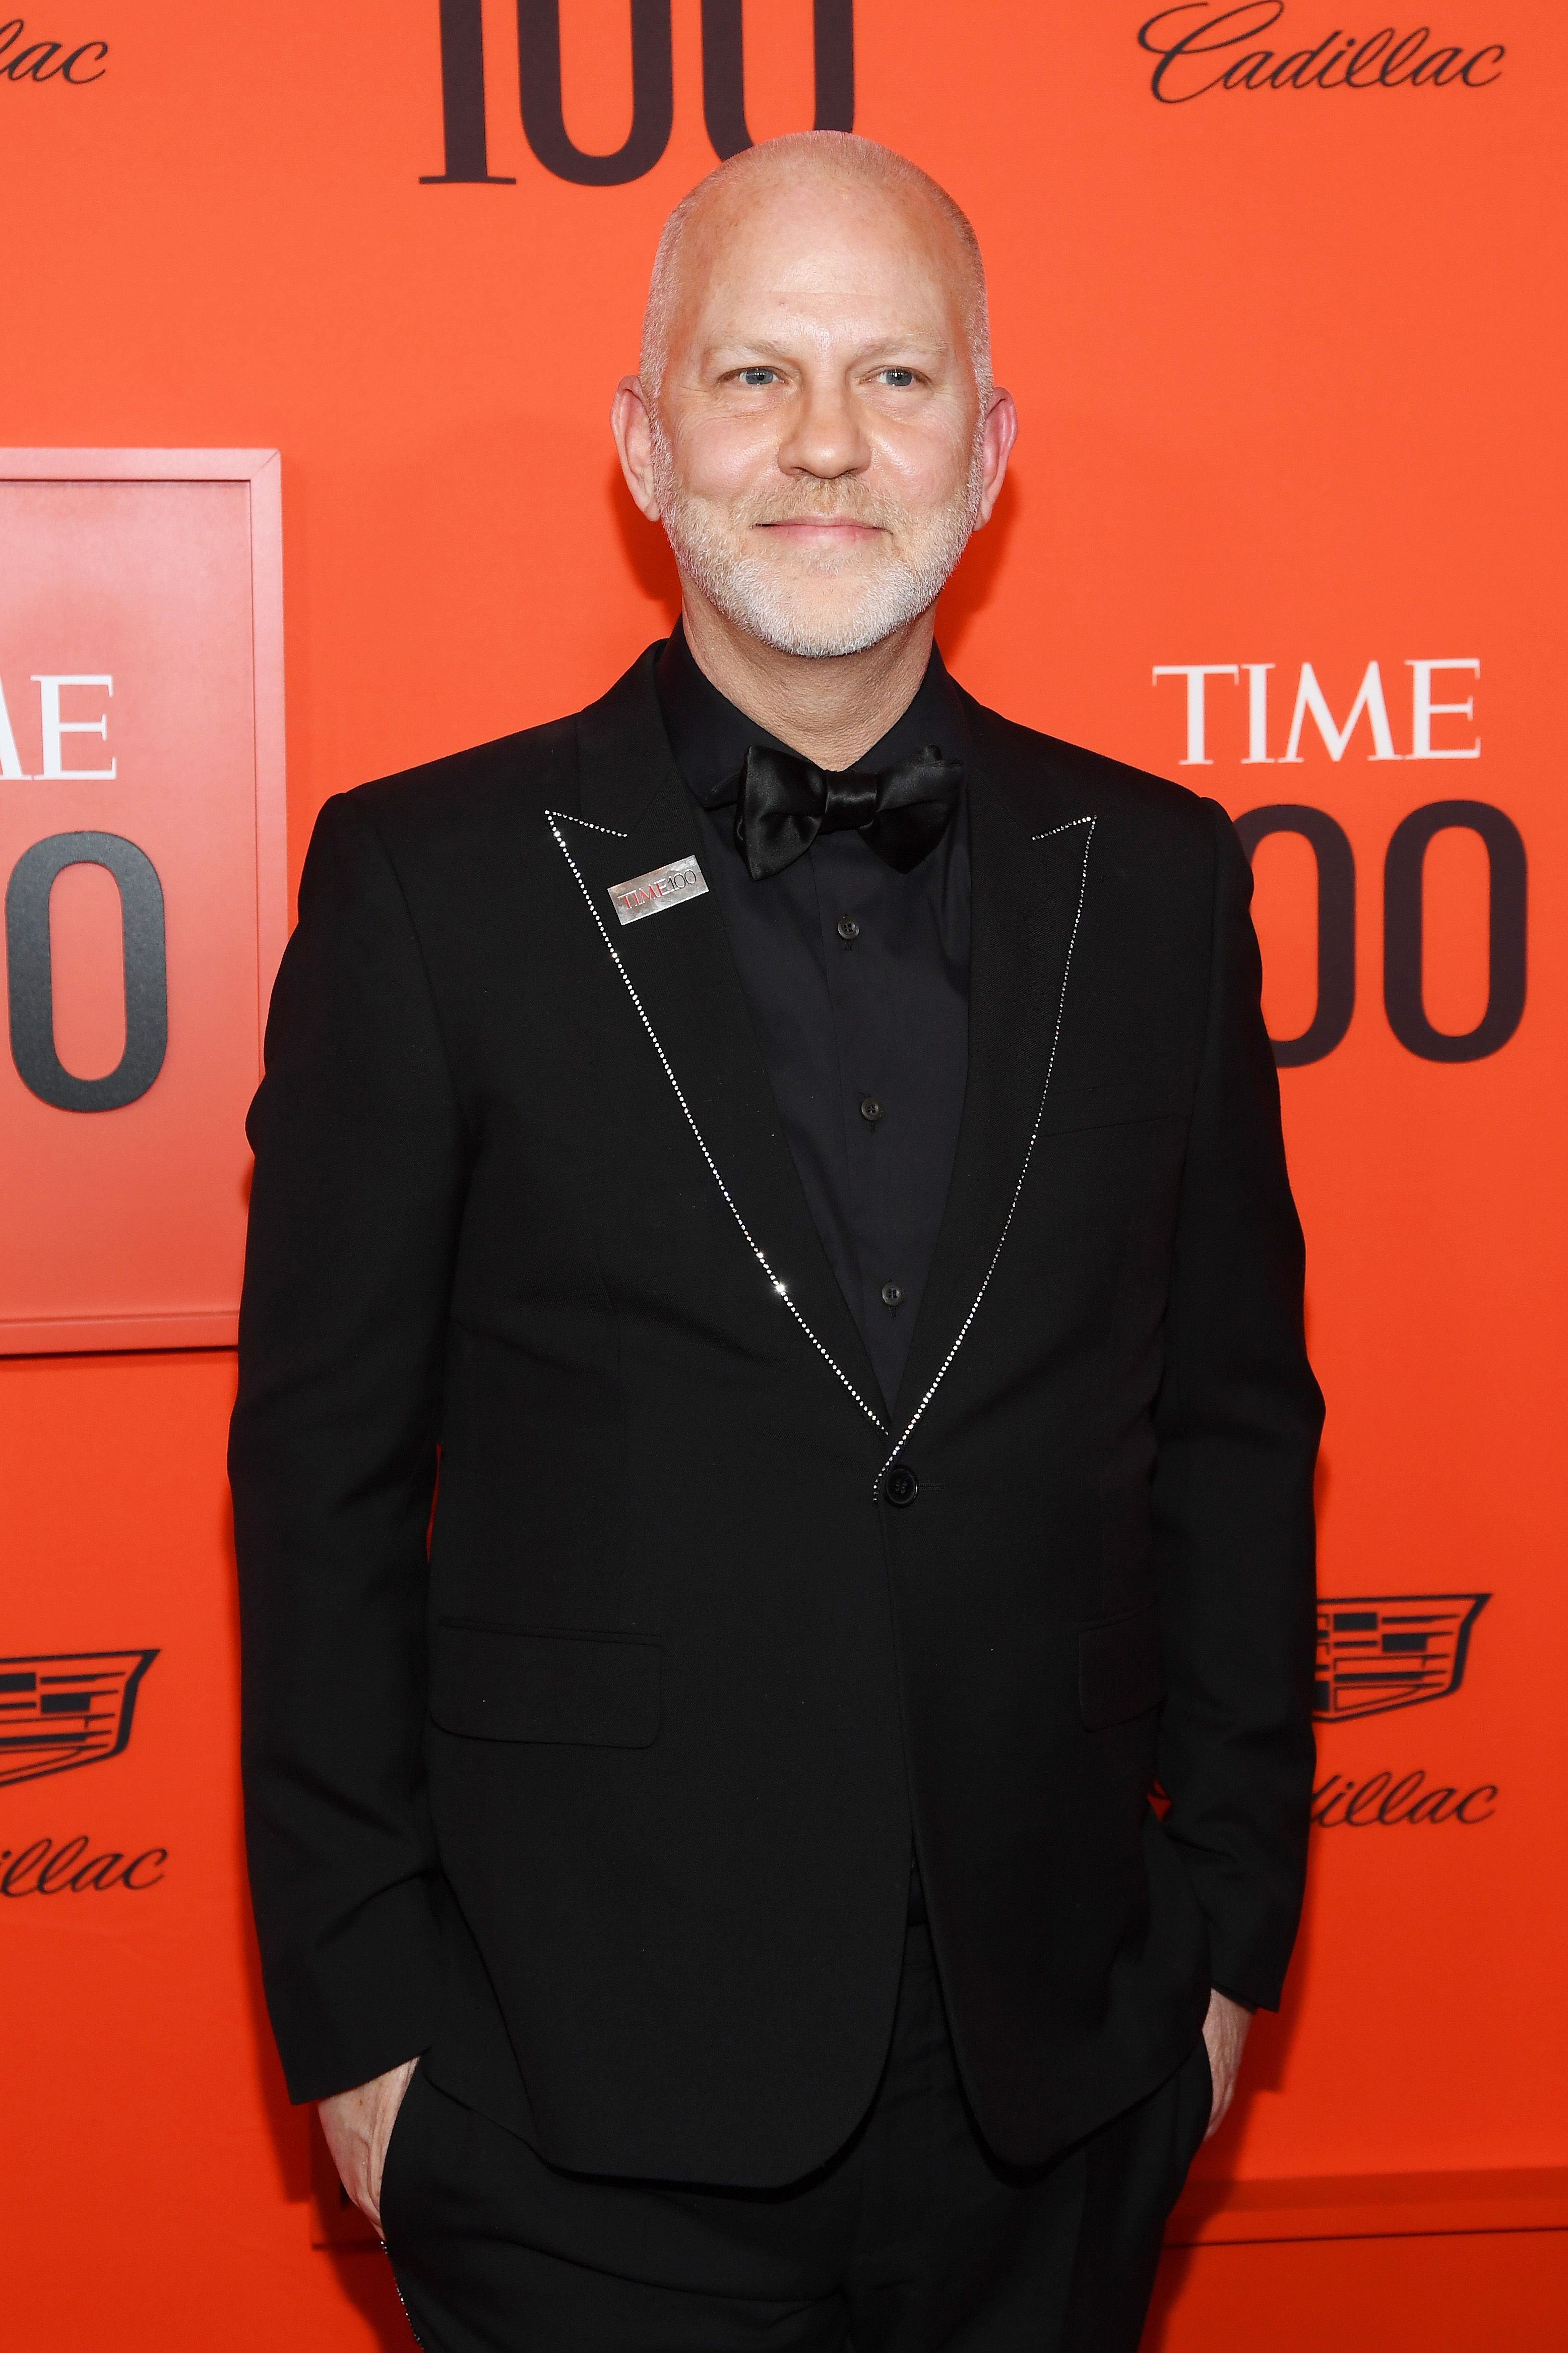 Ryan Murphy at the TIME 100 Gala Red Carpet at Jazz at Lincoln Center on April 23, 2019 in New York City | Photo: Getty Images